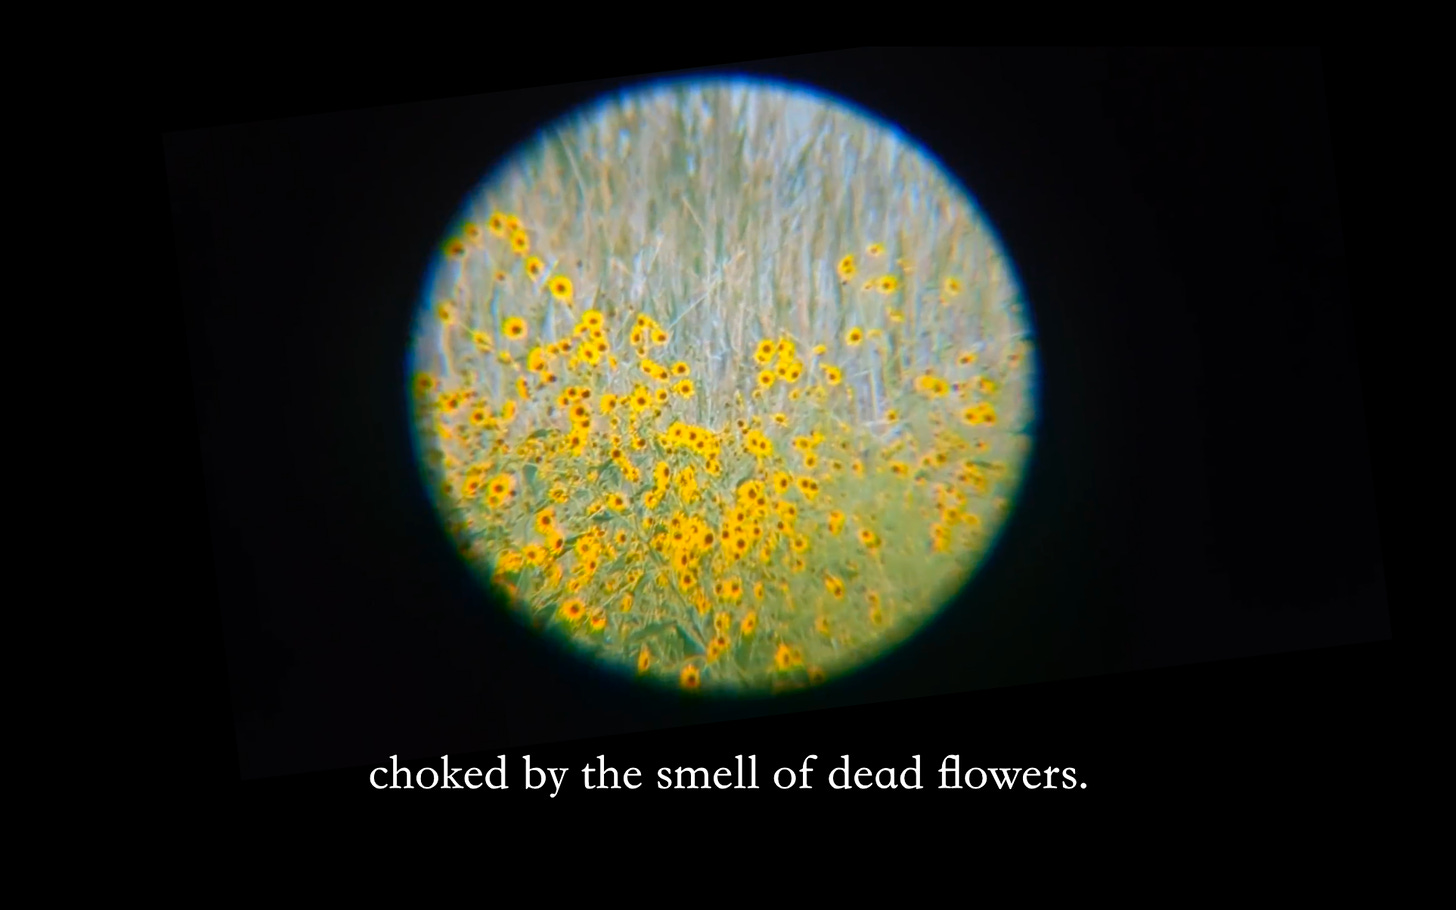 still from the video showing a field of yellow flowers through a telescope lens. below the image are subtitles that read "choked by the smell of dead flowers."